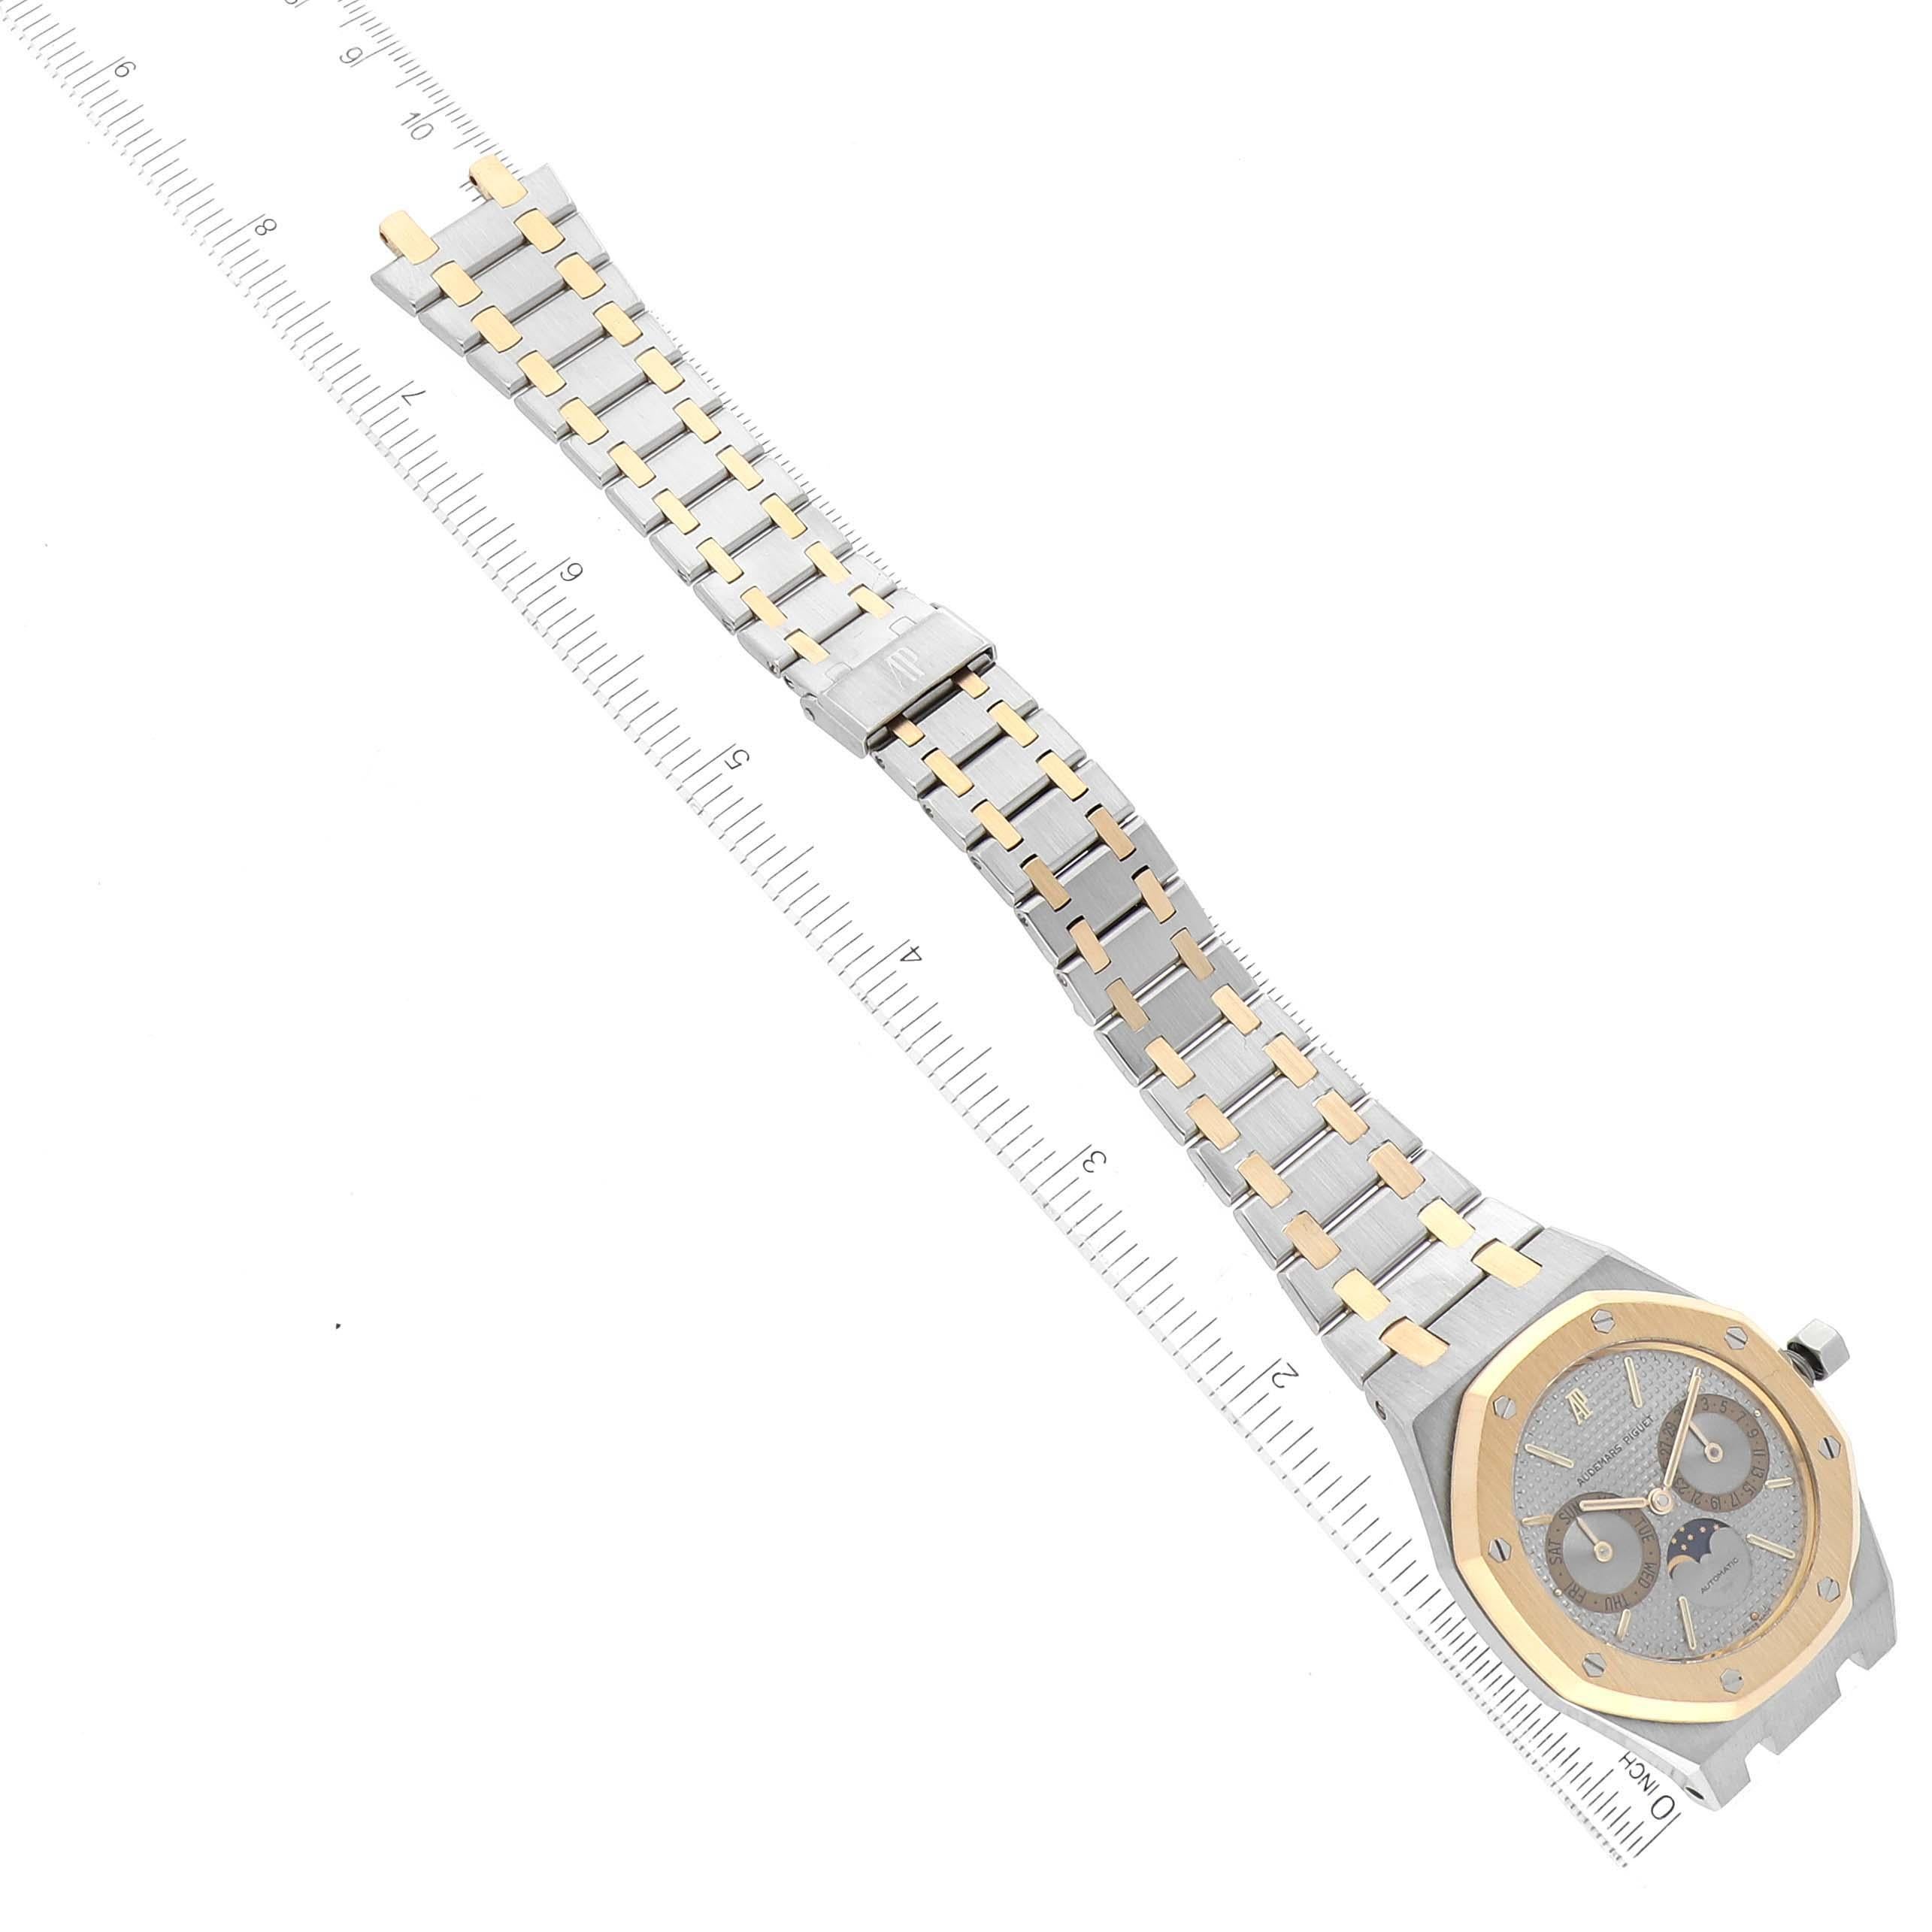 Audemars Piguet Royal Oak Moonphase Steel Yellow Gold Mens Watch 25594SA. Automatic self-winding movement. Brushed stainless steel and 18K yellow gold case 36.0 mm in diameter. 18K yellow gold bezel punctuated with 8 signature screws. Scratch